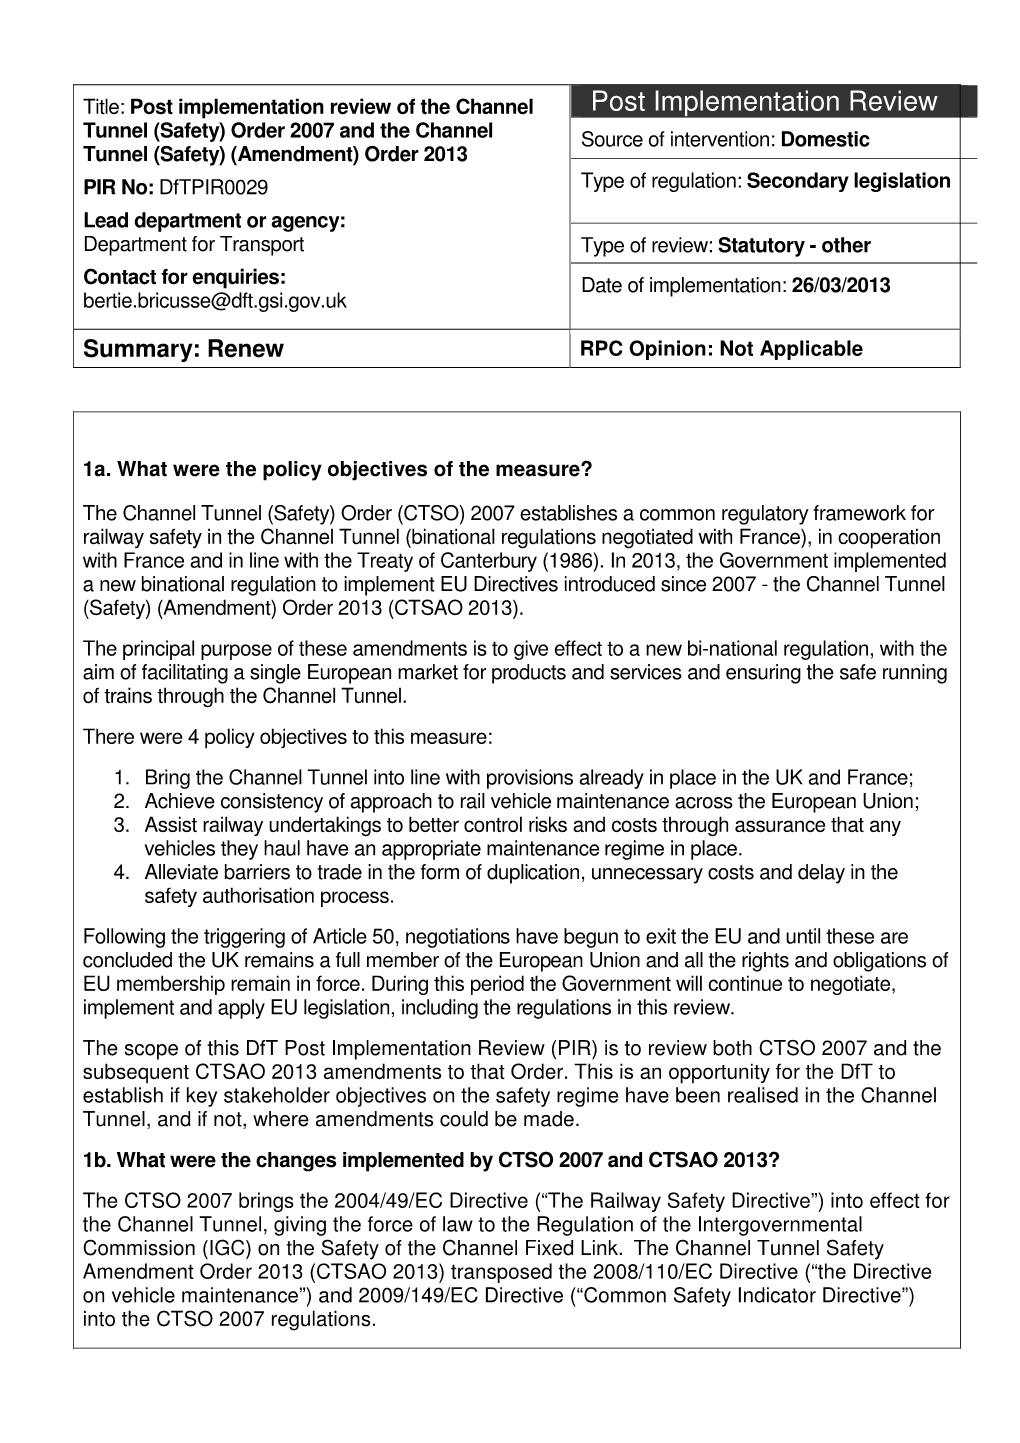 Post Implementation Review Channel Tunnel Safety Order